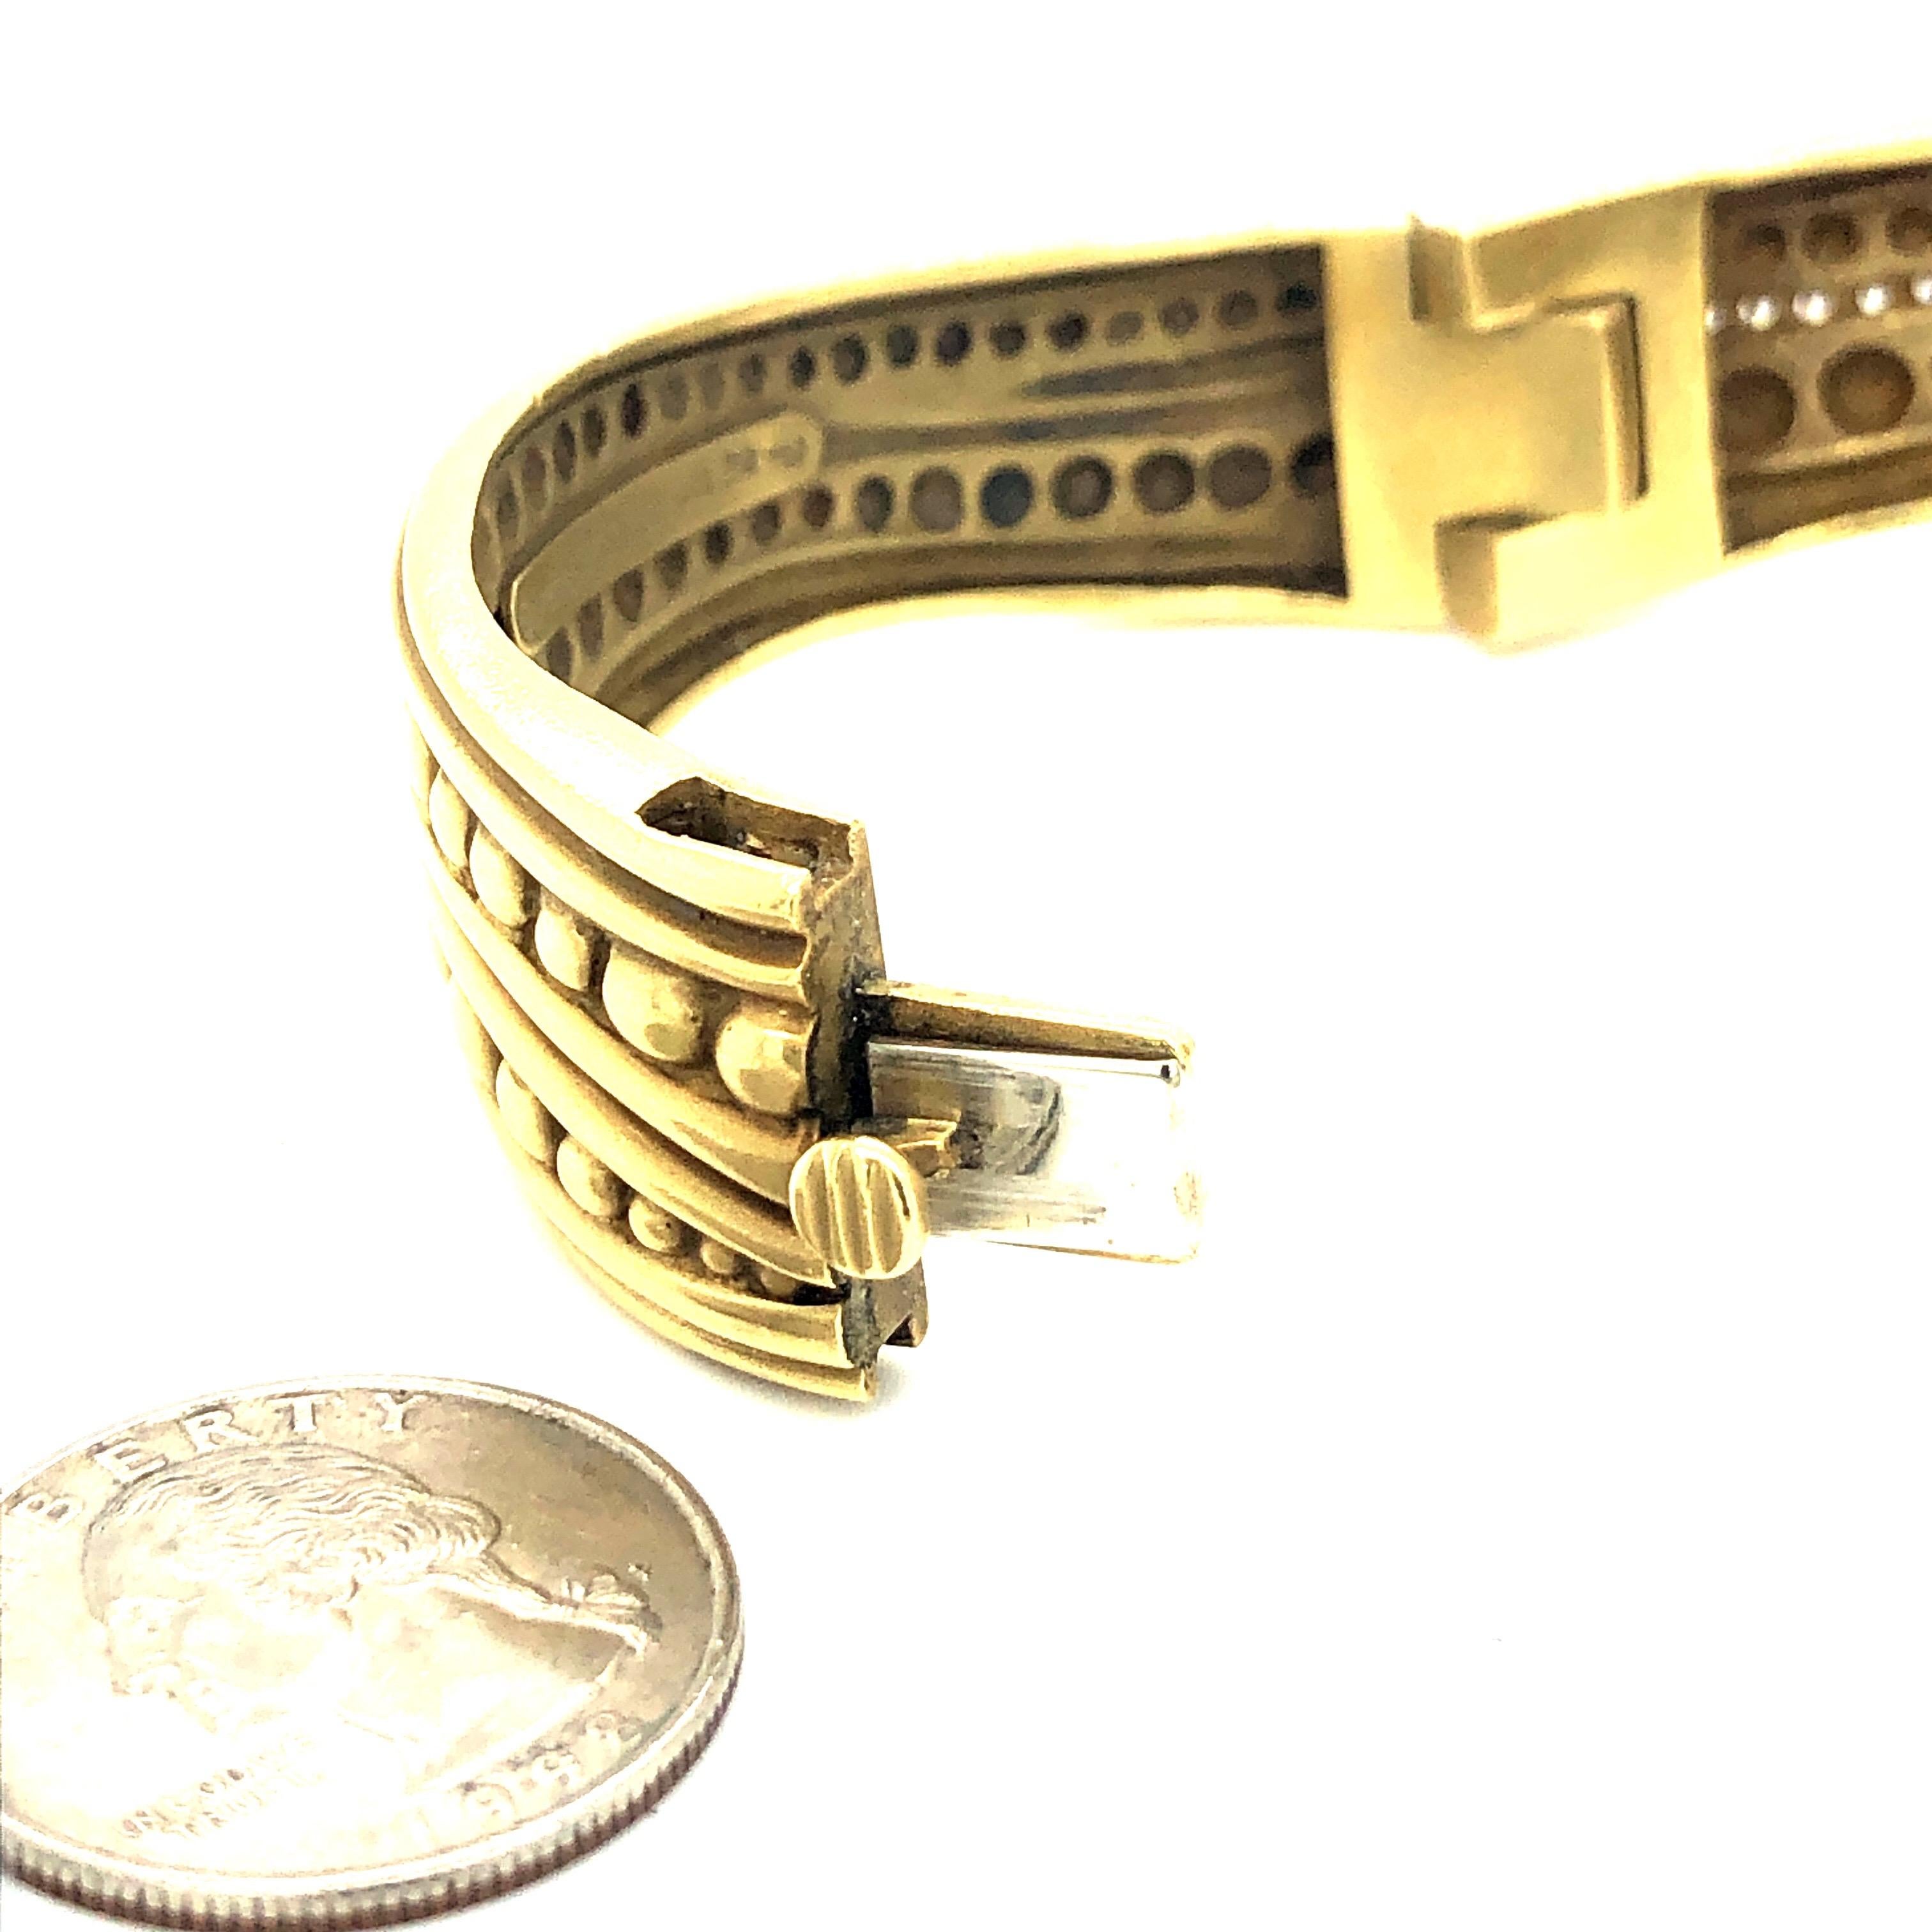 Kieselstein Cord 18K yellow gold Large Caviar Diamond Bracelet. Stamped B. Kieselstein 1992 and 750. Two safety clasps on hinged cuff. Classic Caviar Design in a wavy style. Fits standard size 7-7.5 wrist. Kieselstein Cord offers this bracelet in